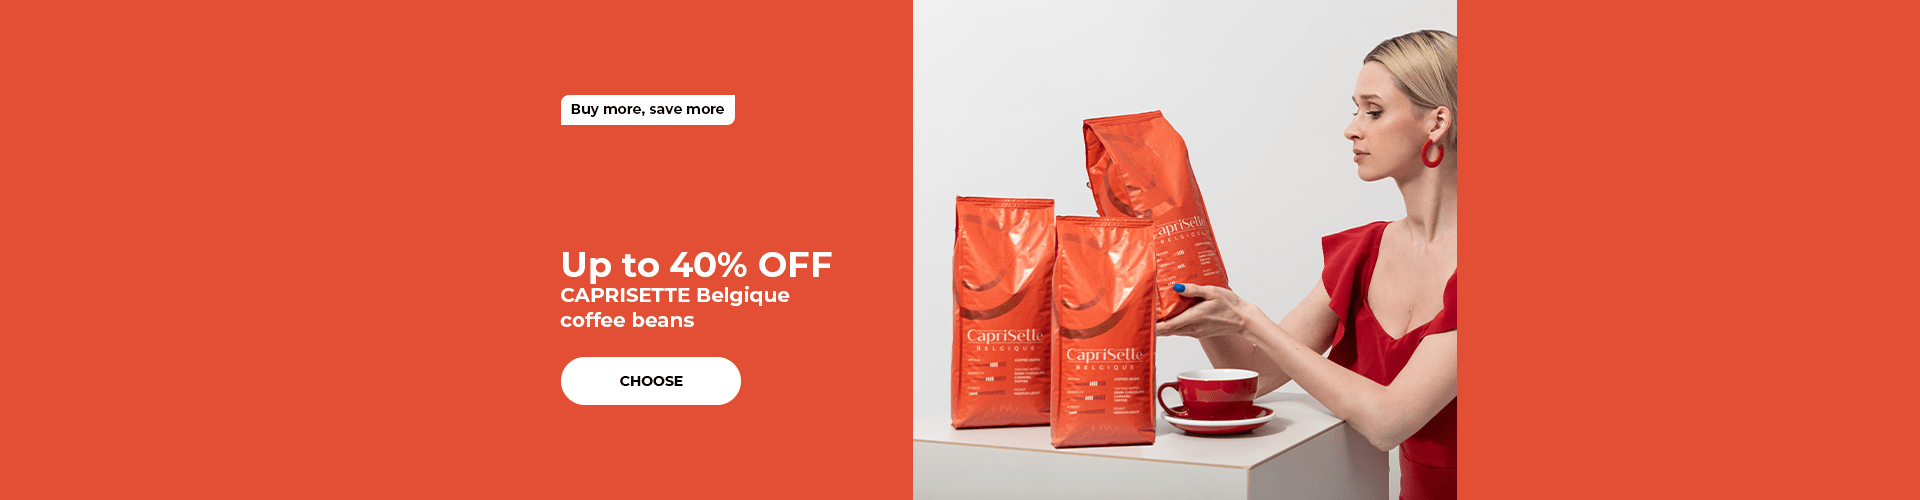 Up to 40% OFF CAPRISETTE Belgique coffee beans